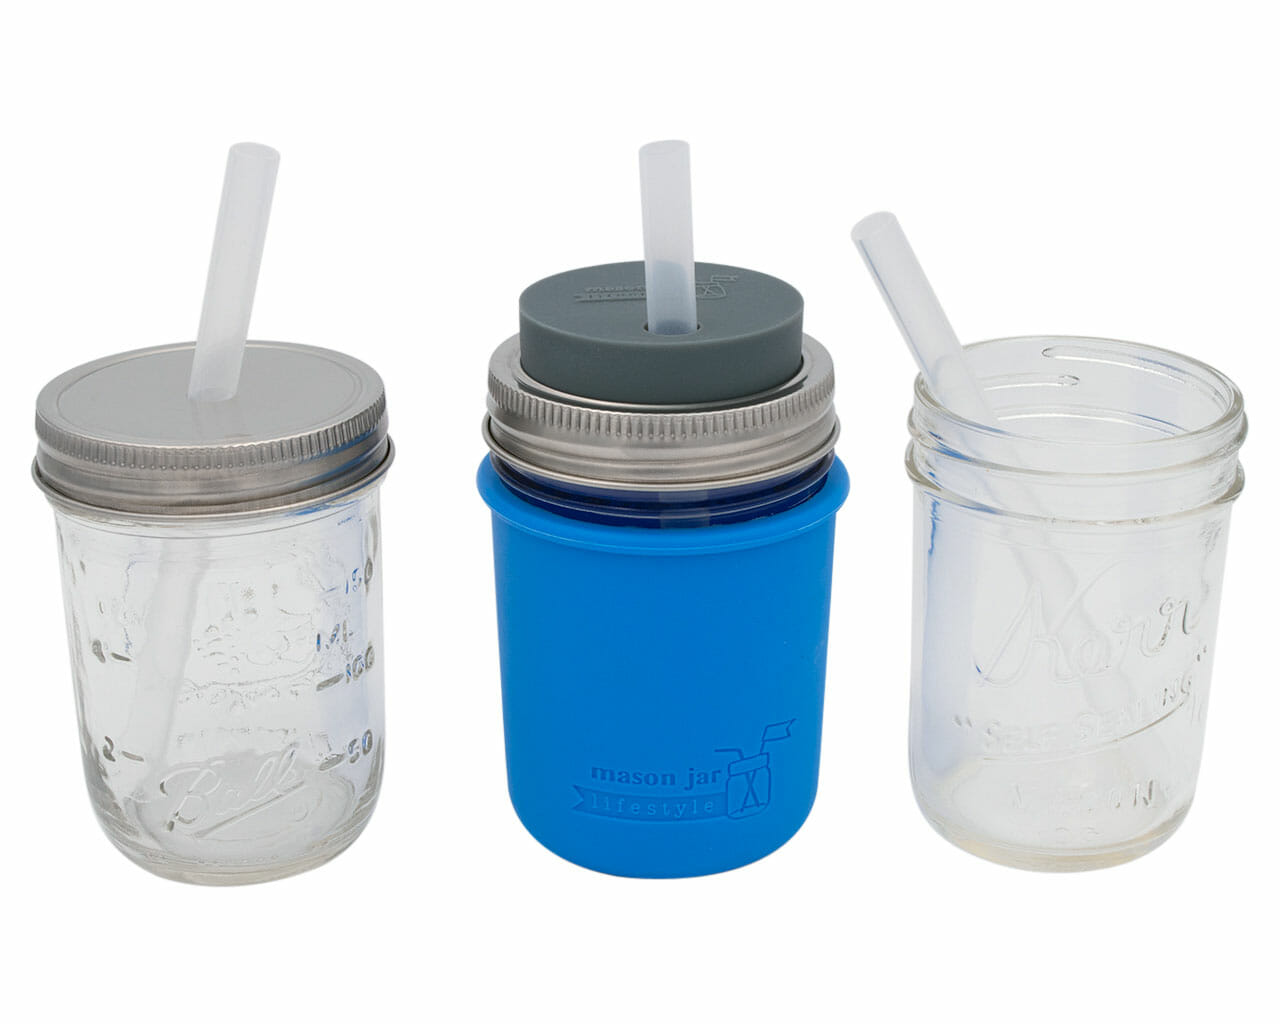 Use a reusable silicone straw lid